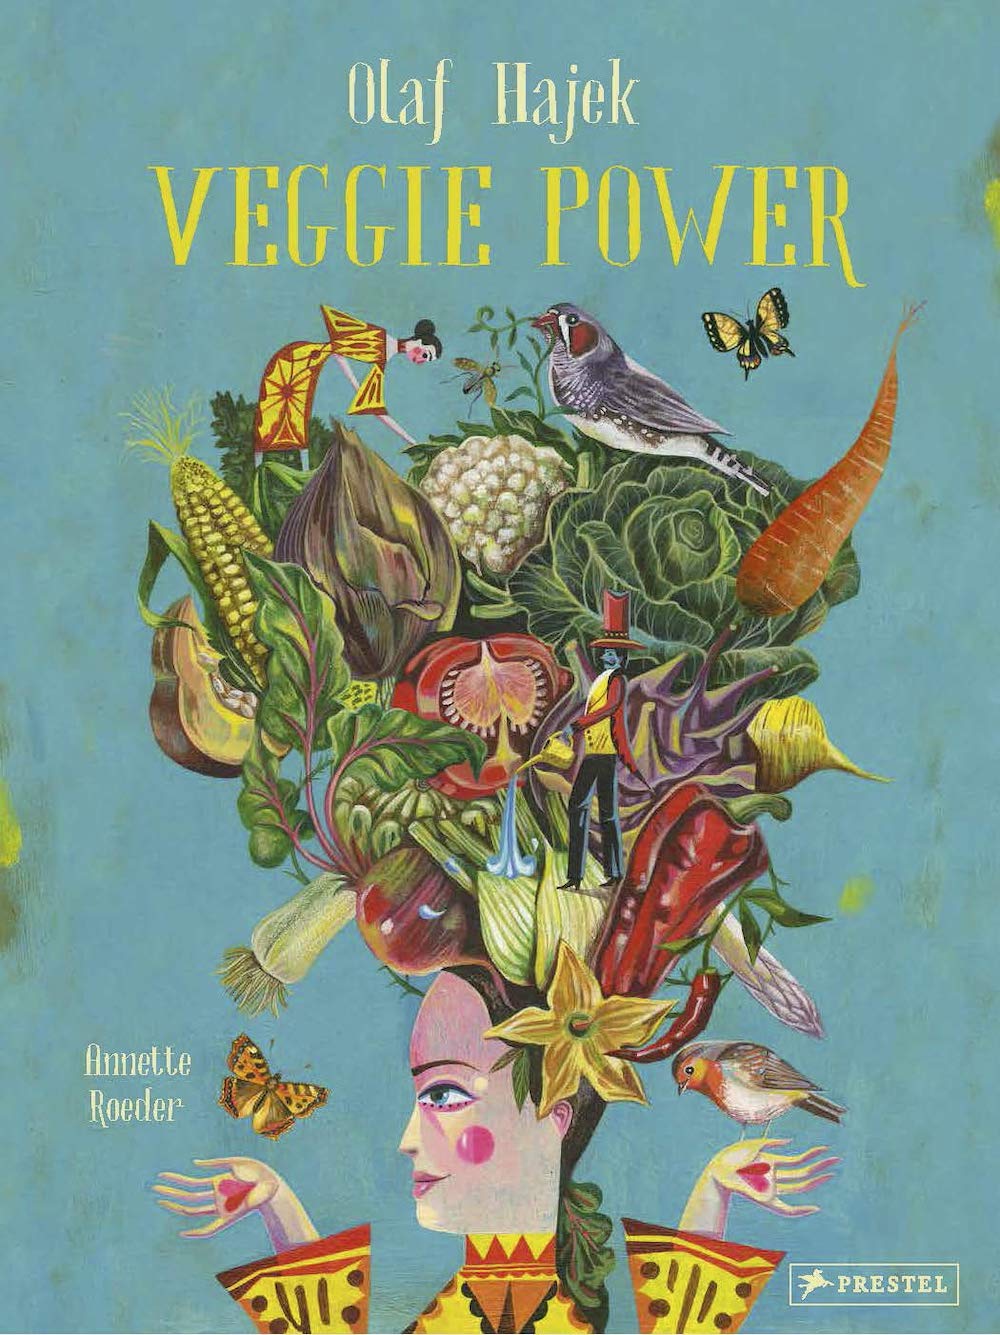 5 new books about spring for kids: Veggie Power by Annette Roemer and Olaf Hajek